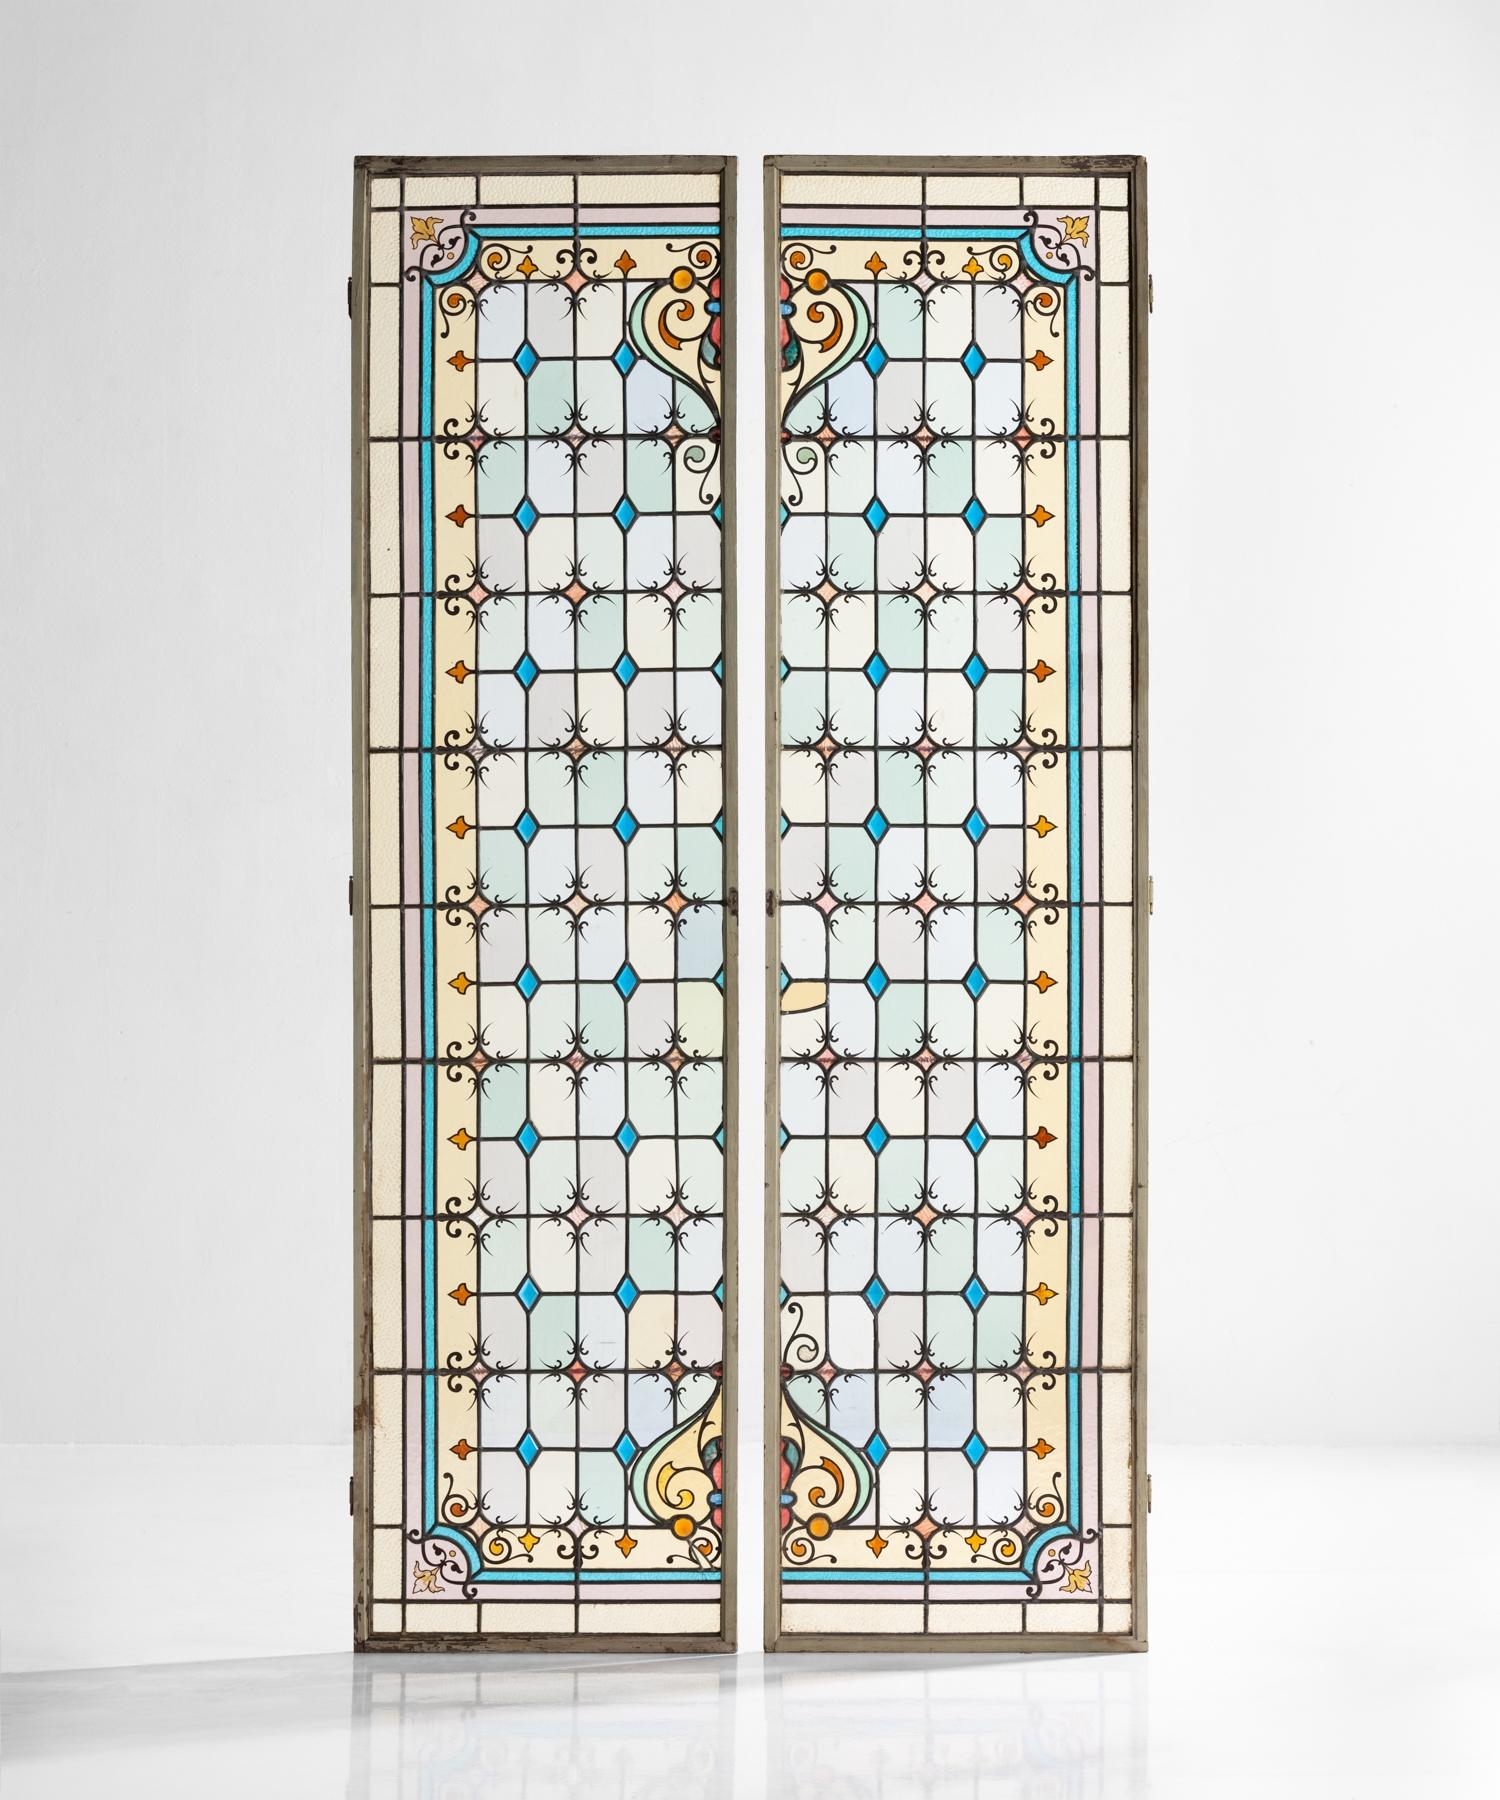 Pair of leaded and painted glass shutters, France, circa 1890.

Detailed geometric patterning on glass panes with iron supports in original wooden shutters.